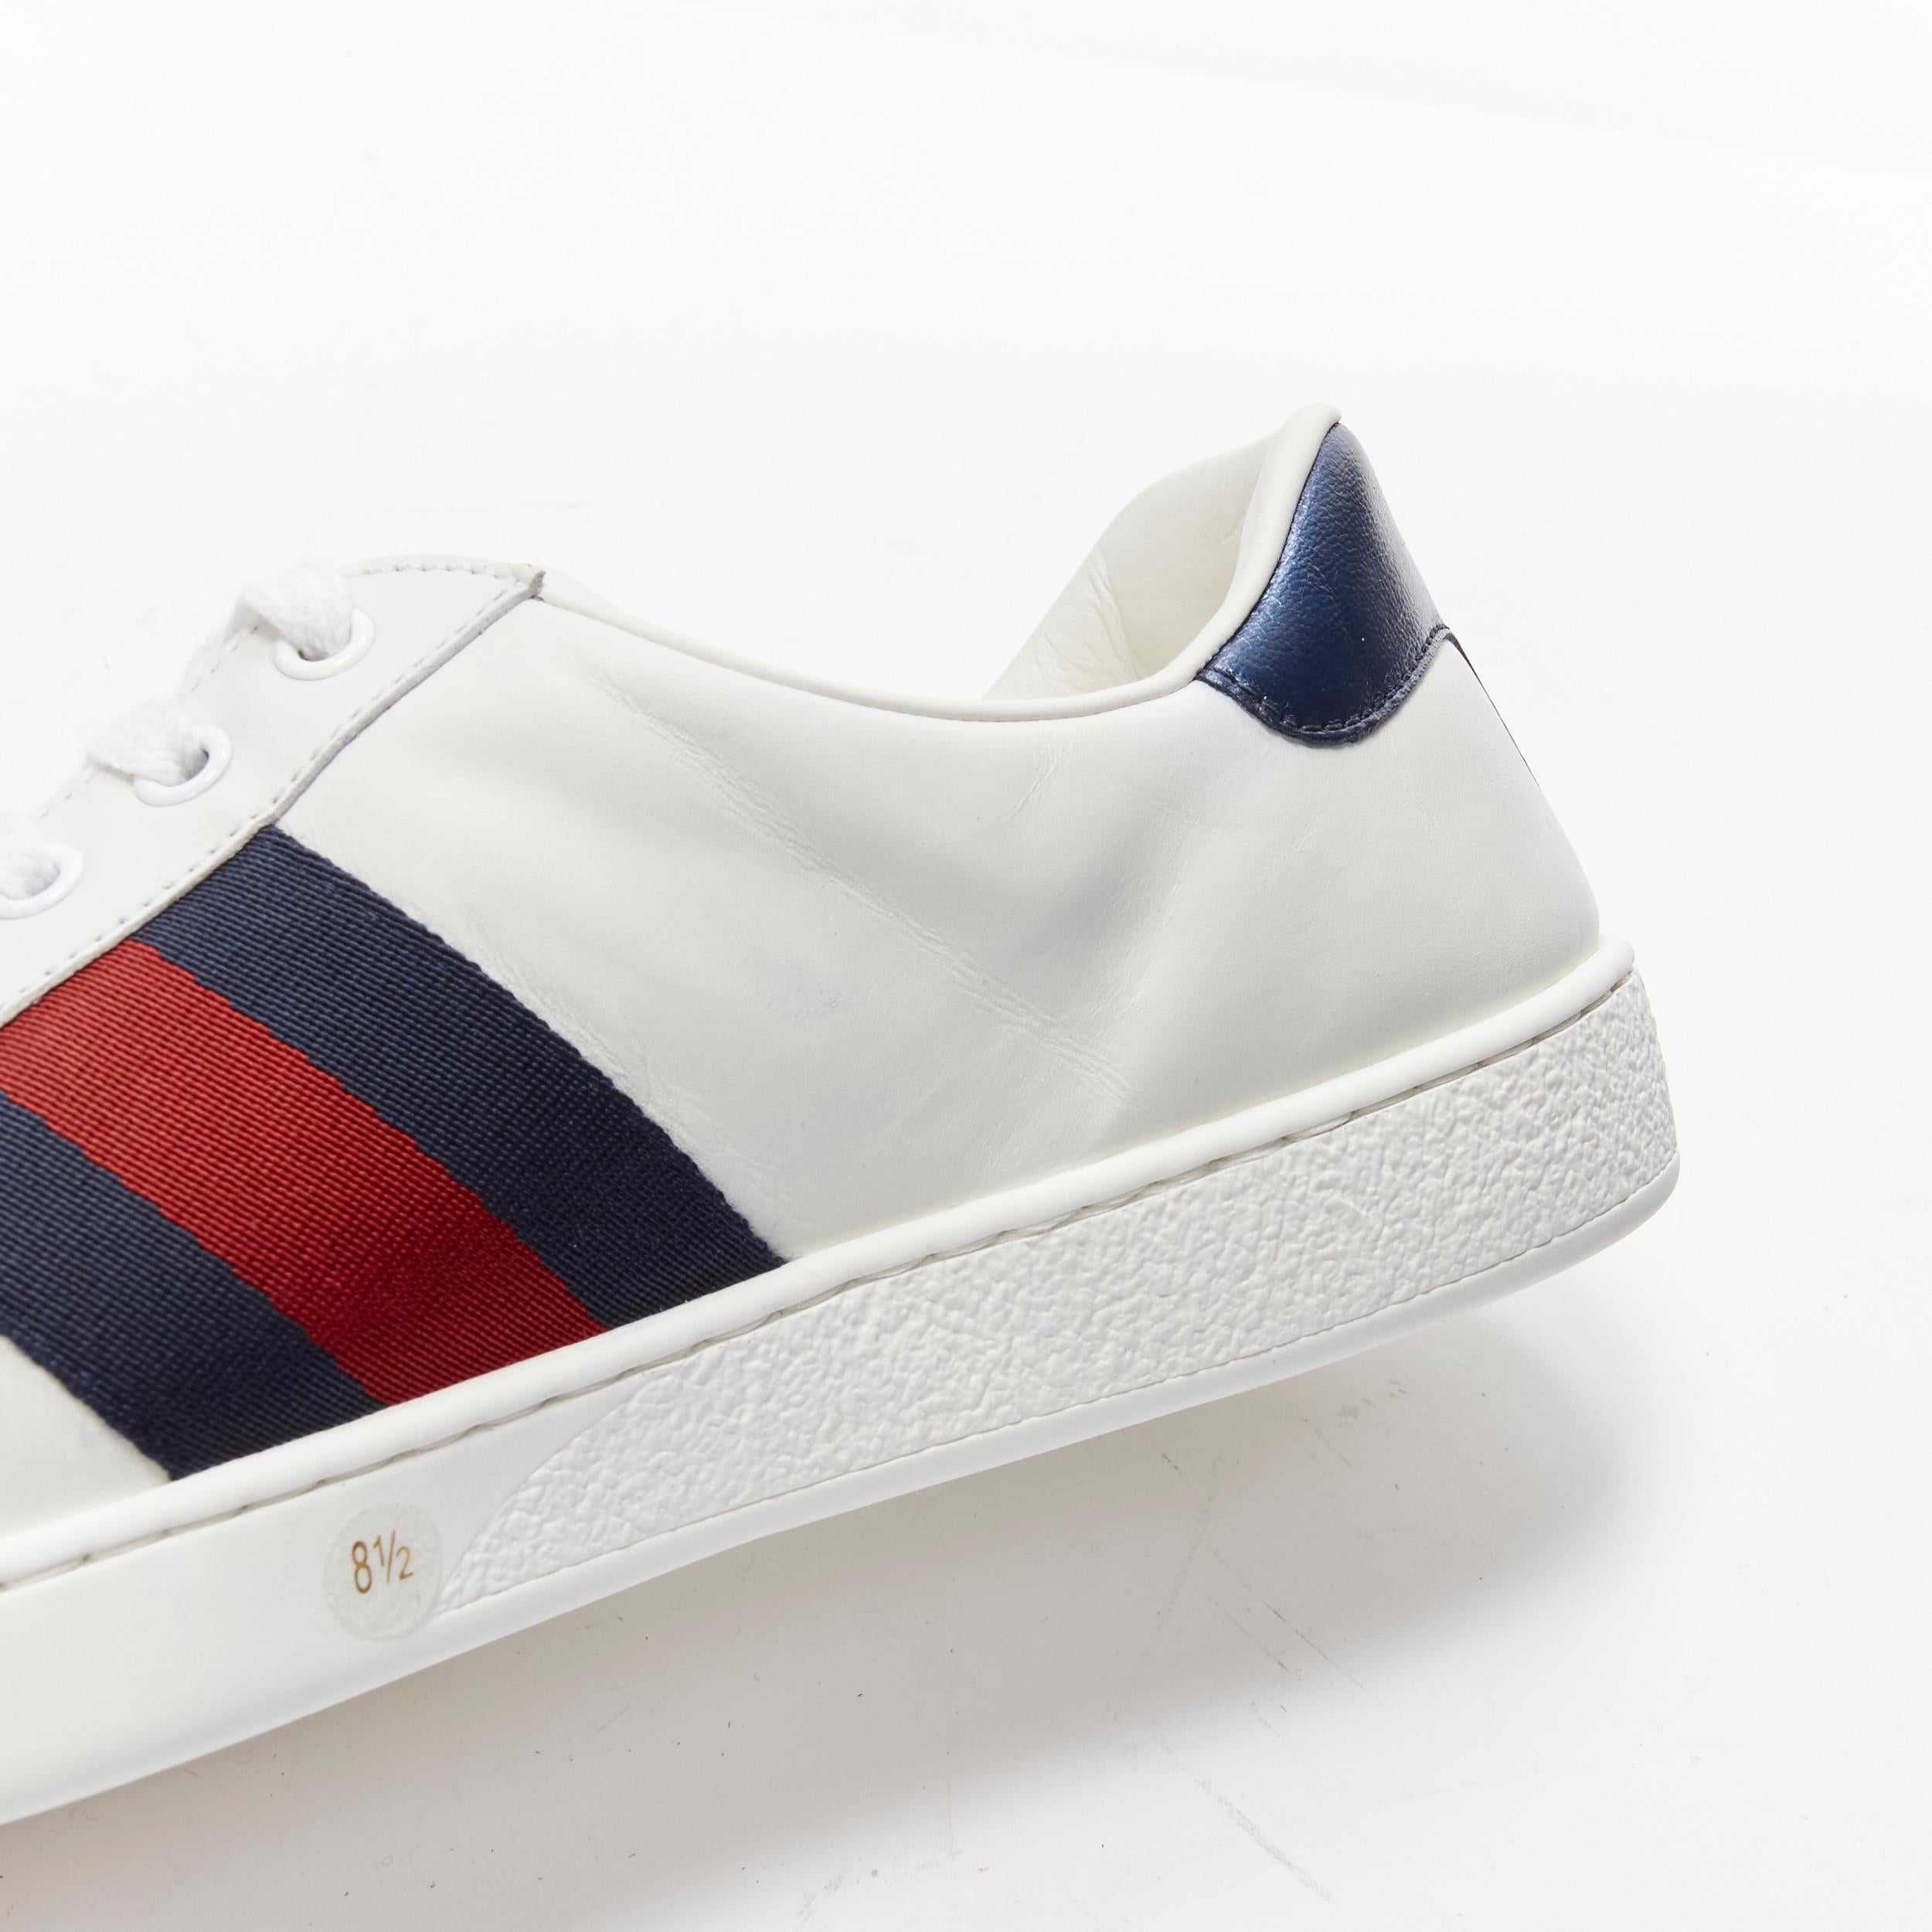 GUCCI Ace Loved gold embroidered blue red web leather sneakers UK8.5 EU42.5 For Sale 3